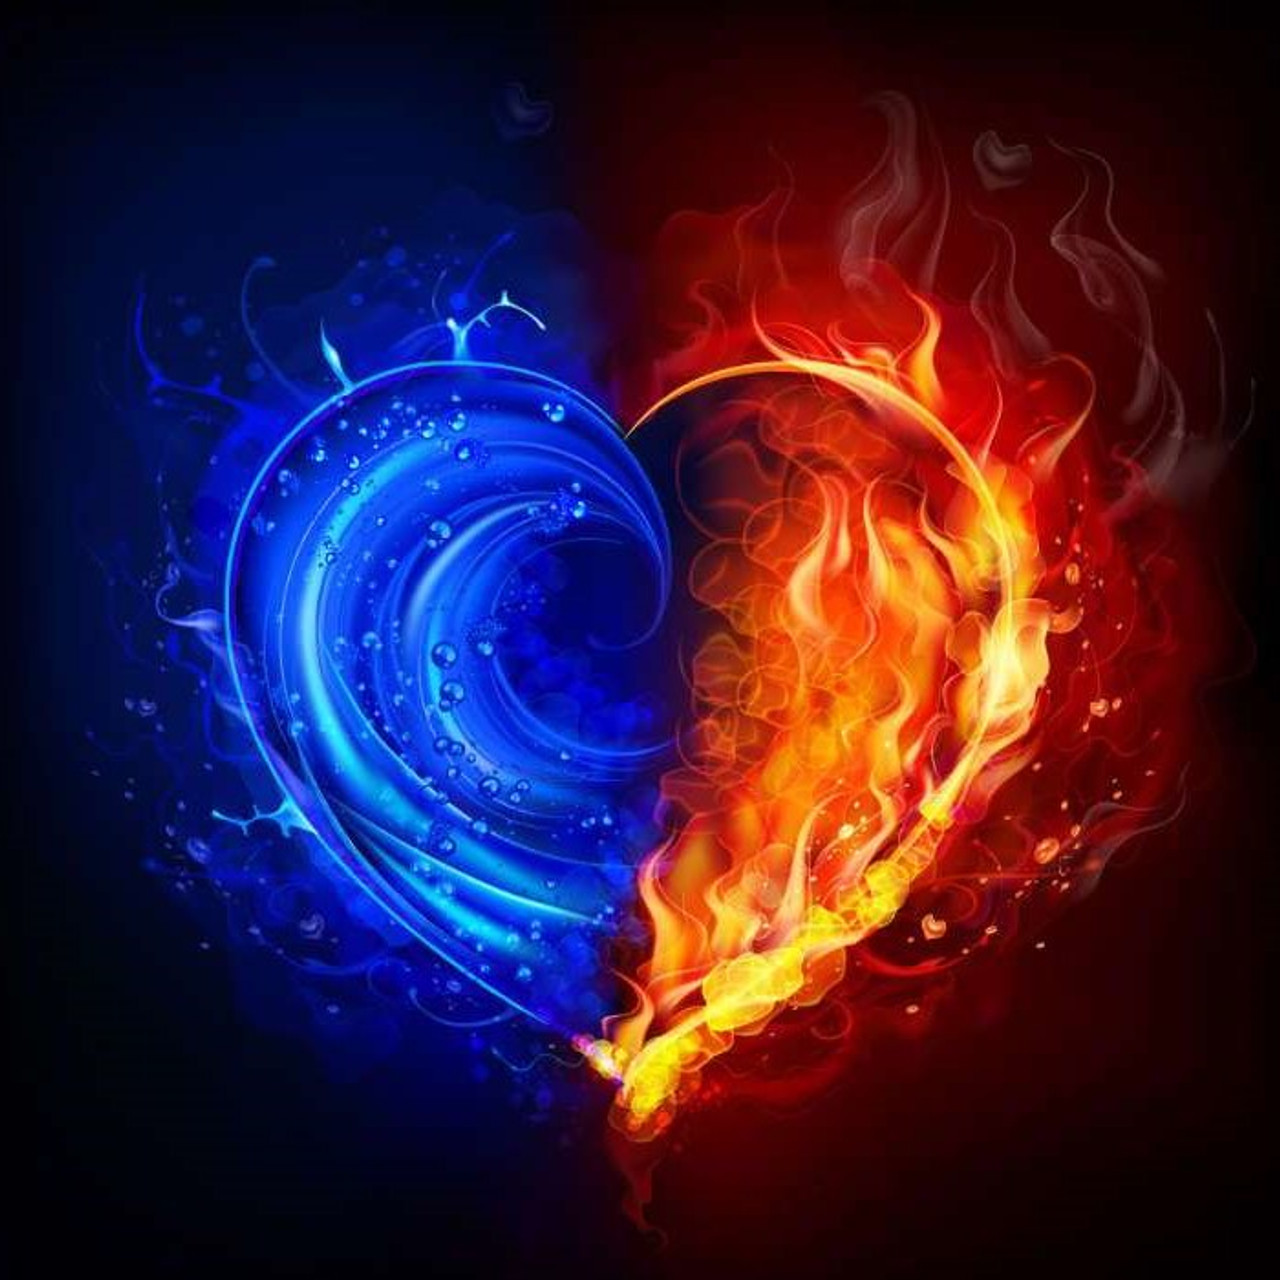 ice blue hearts on fire